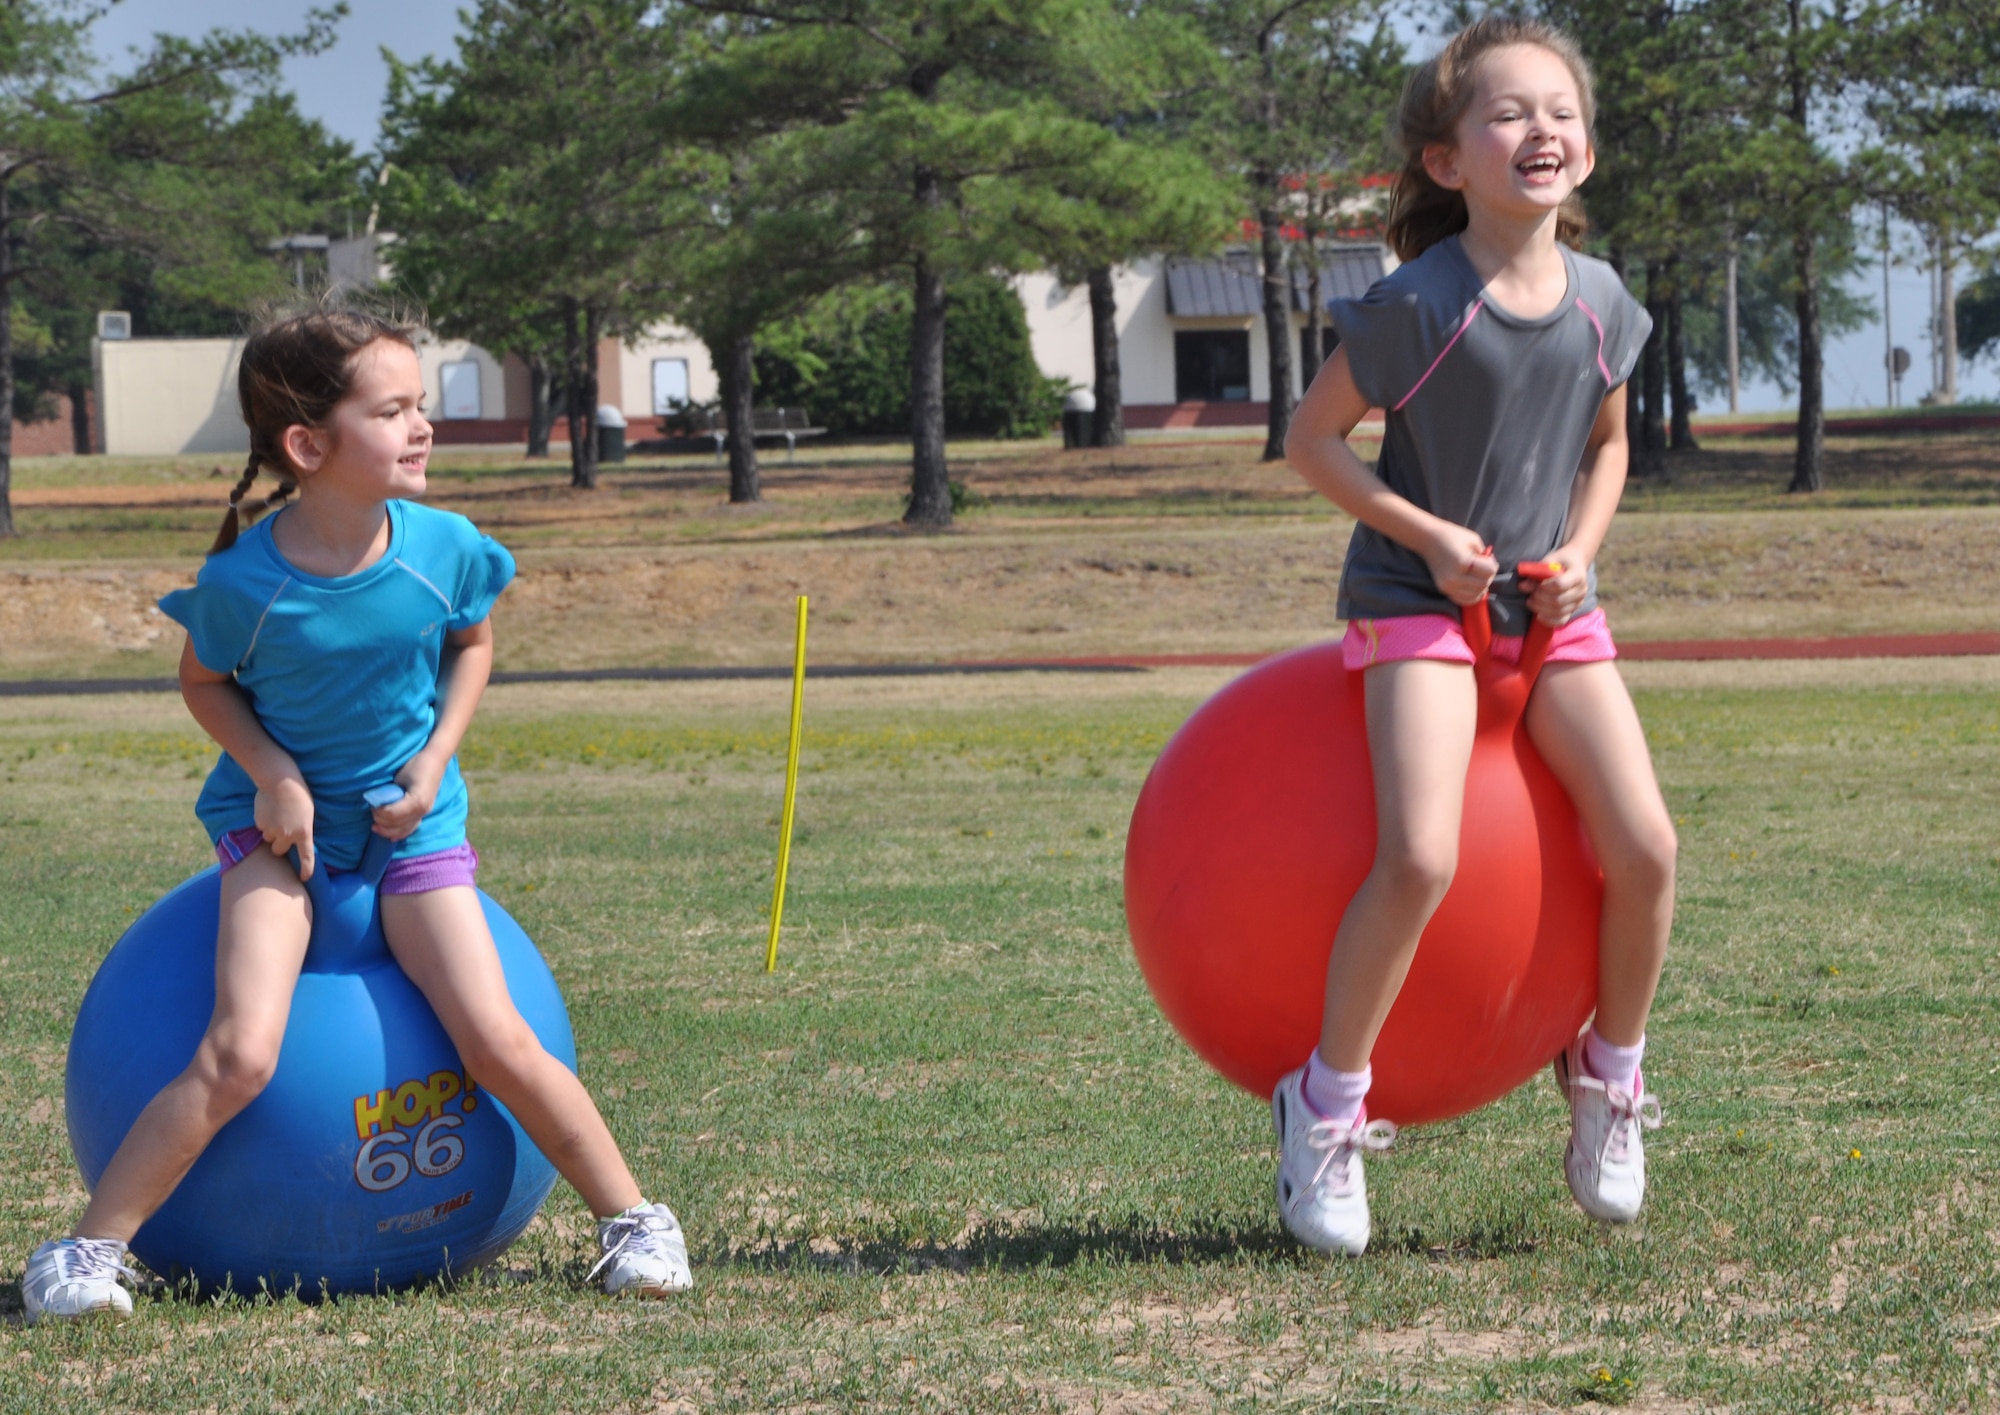 Eloise Brown, 5, and her sister Cece, 6, race against each other on bouncy balls during kid's Field Day at the Warfit Track May 19, 2012, at Little Rock Air Force Base, Ark. The field day lasted from 9 a.m. - 12 p.m., and ended with a race around the track. (U.S. Air Force photo by Staff Sgt. Jacob Barreiro)